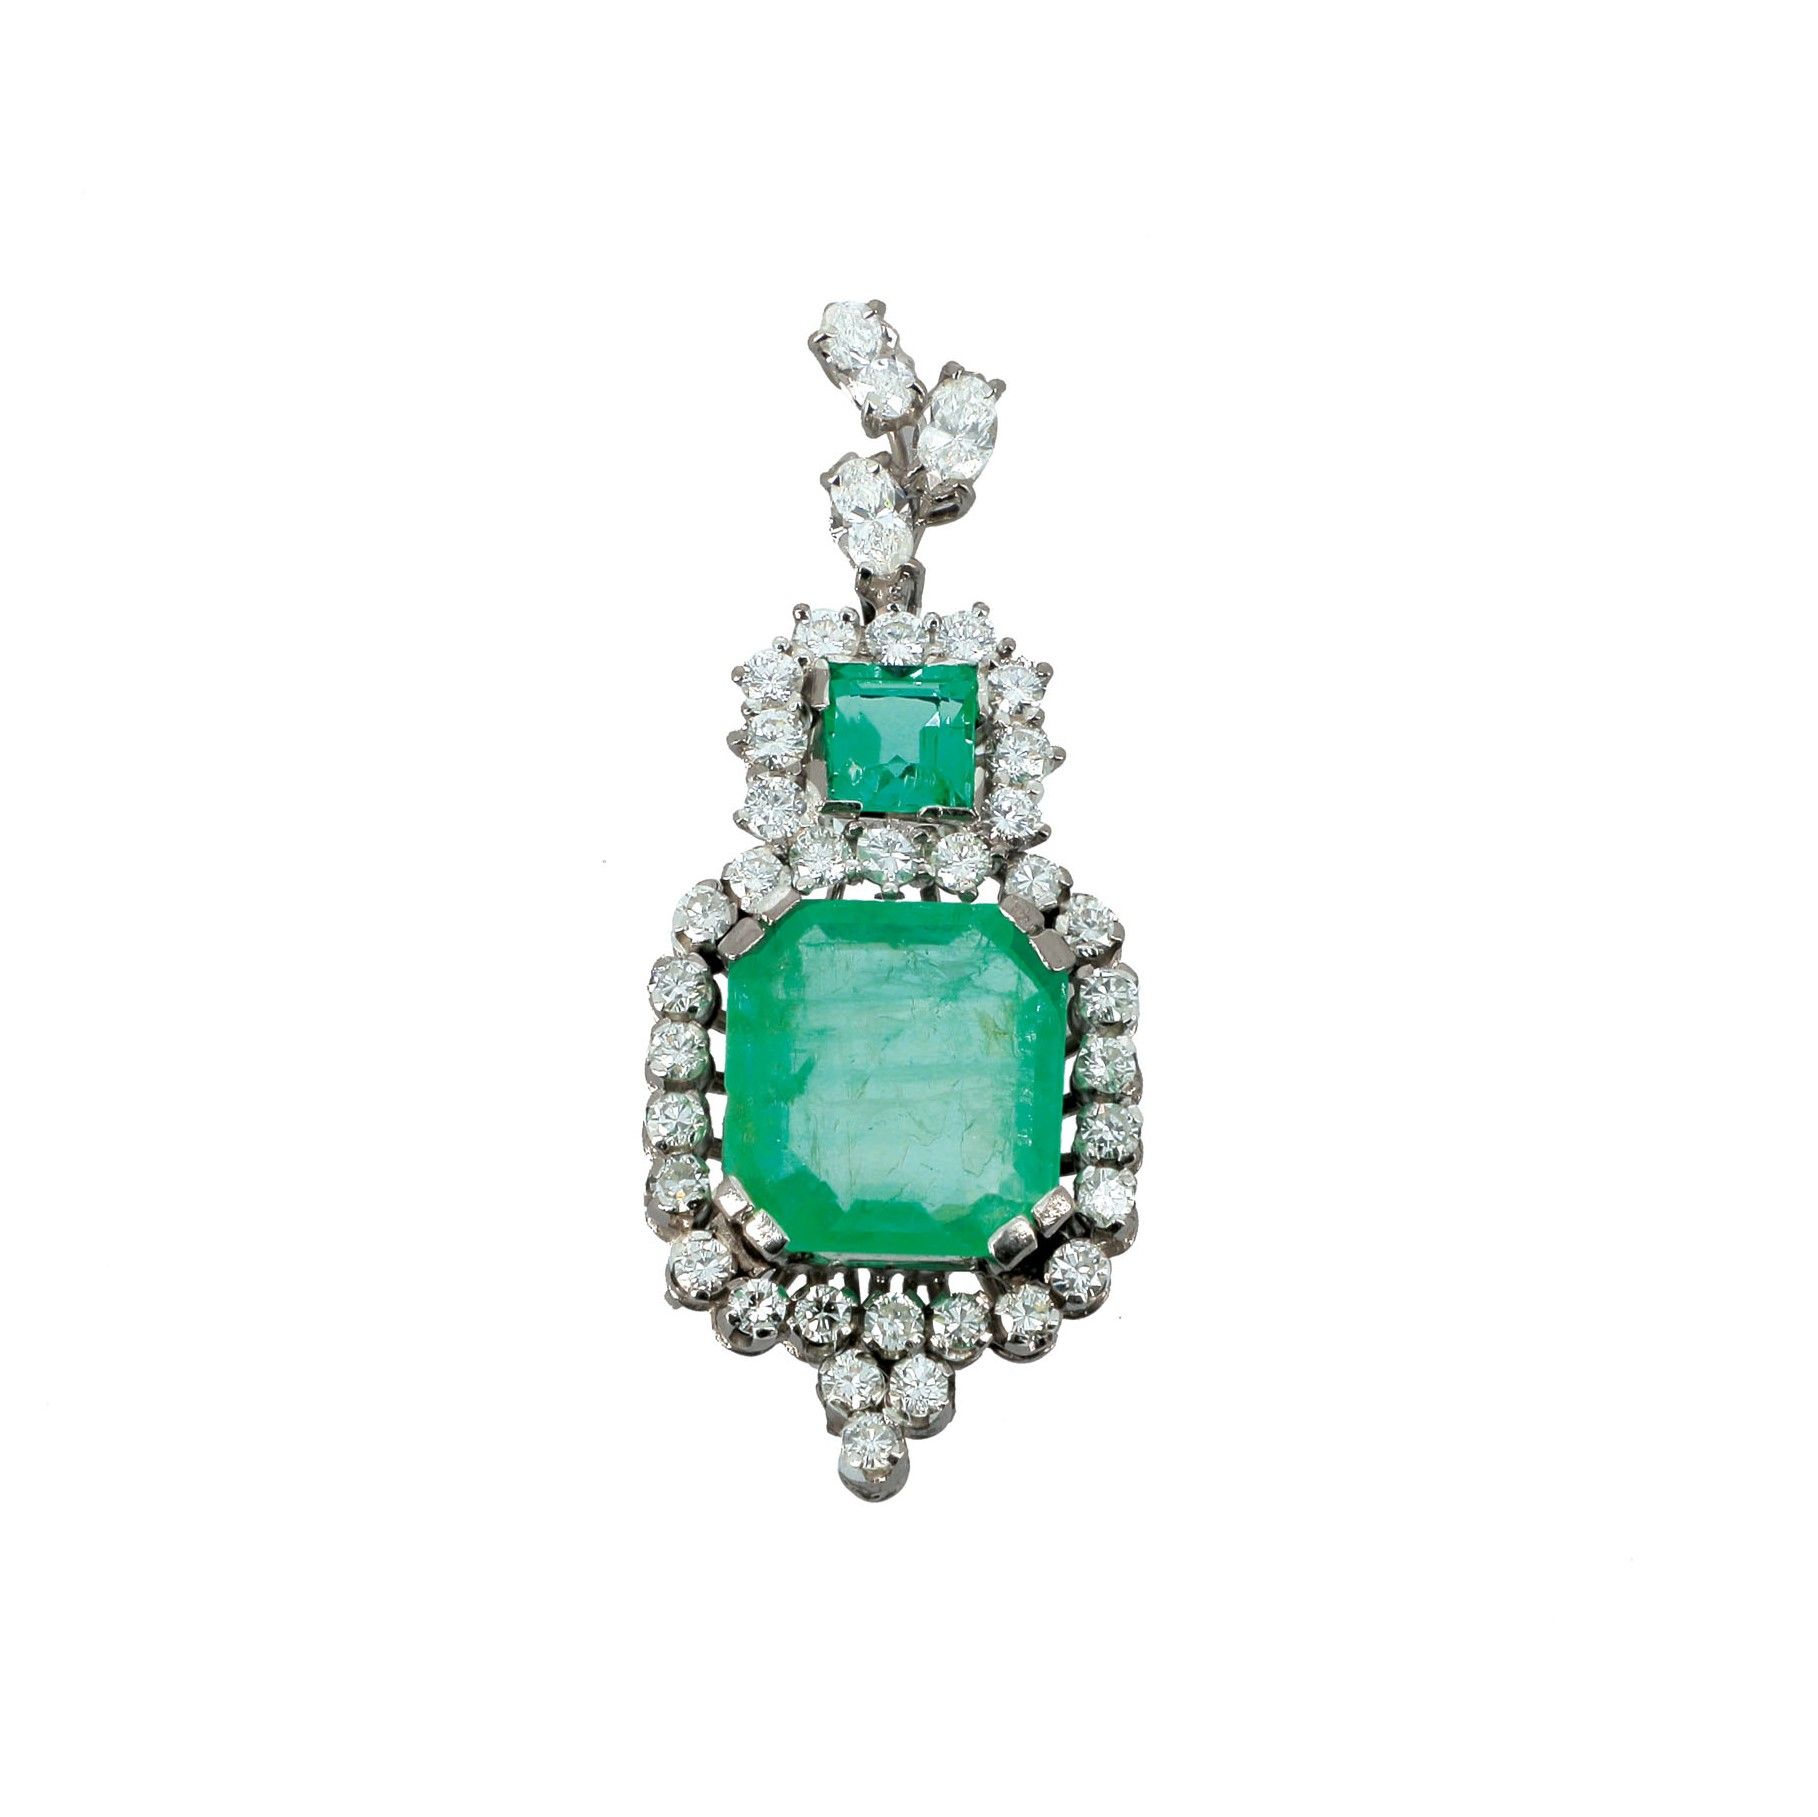 Null PENDANT

A white gold pendant with two emeralds surrounded by diamonds, hel&hellip;